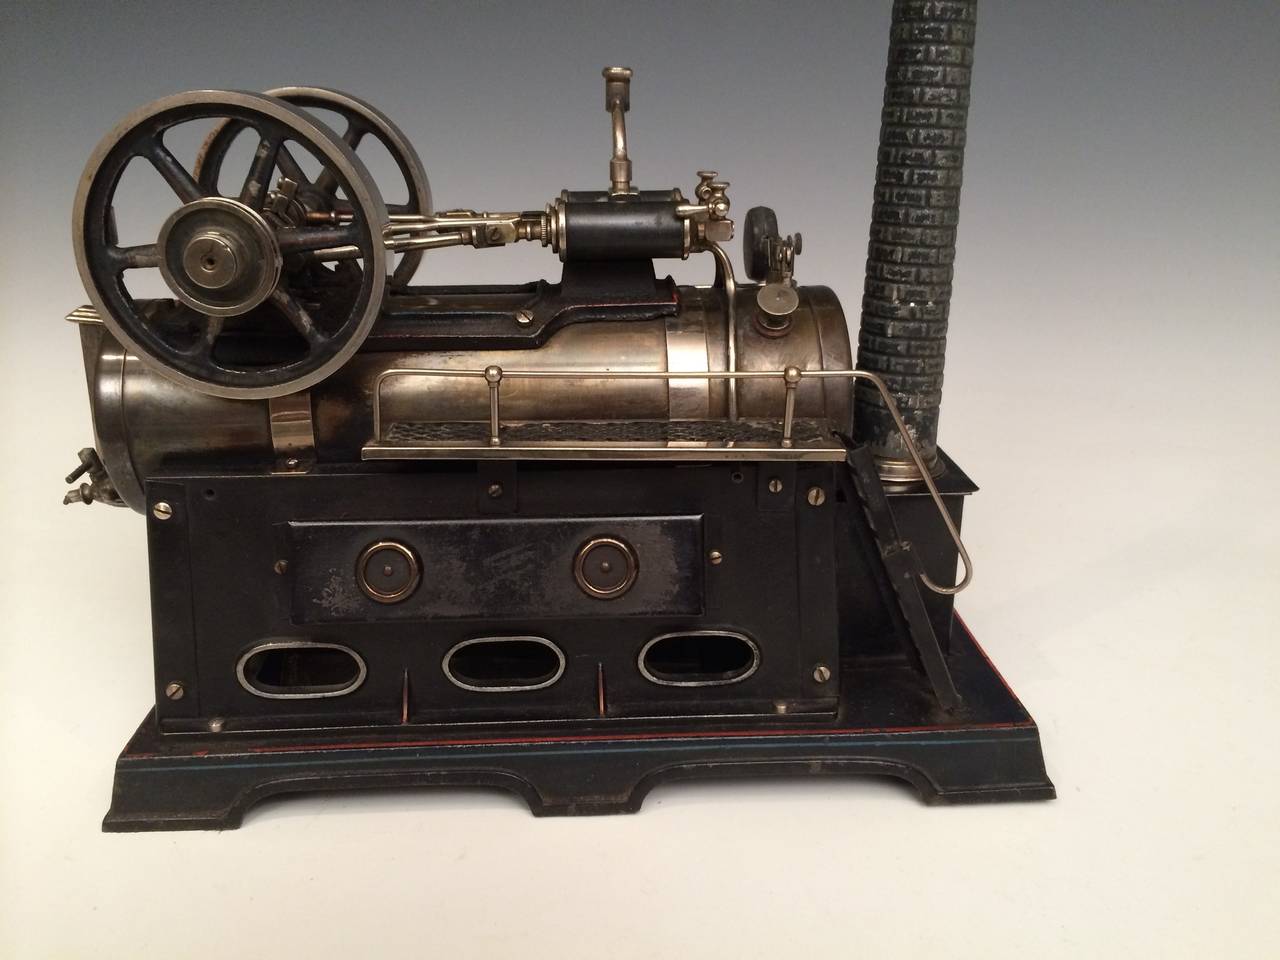 A good example of an early 20th century live steam model.